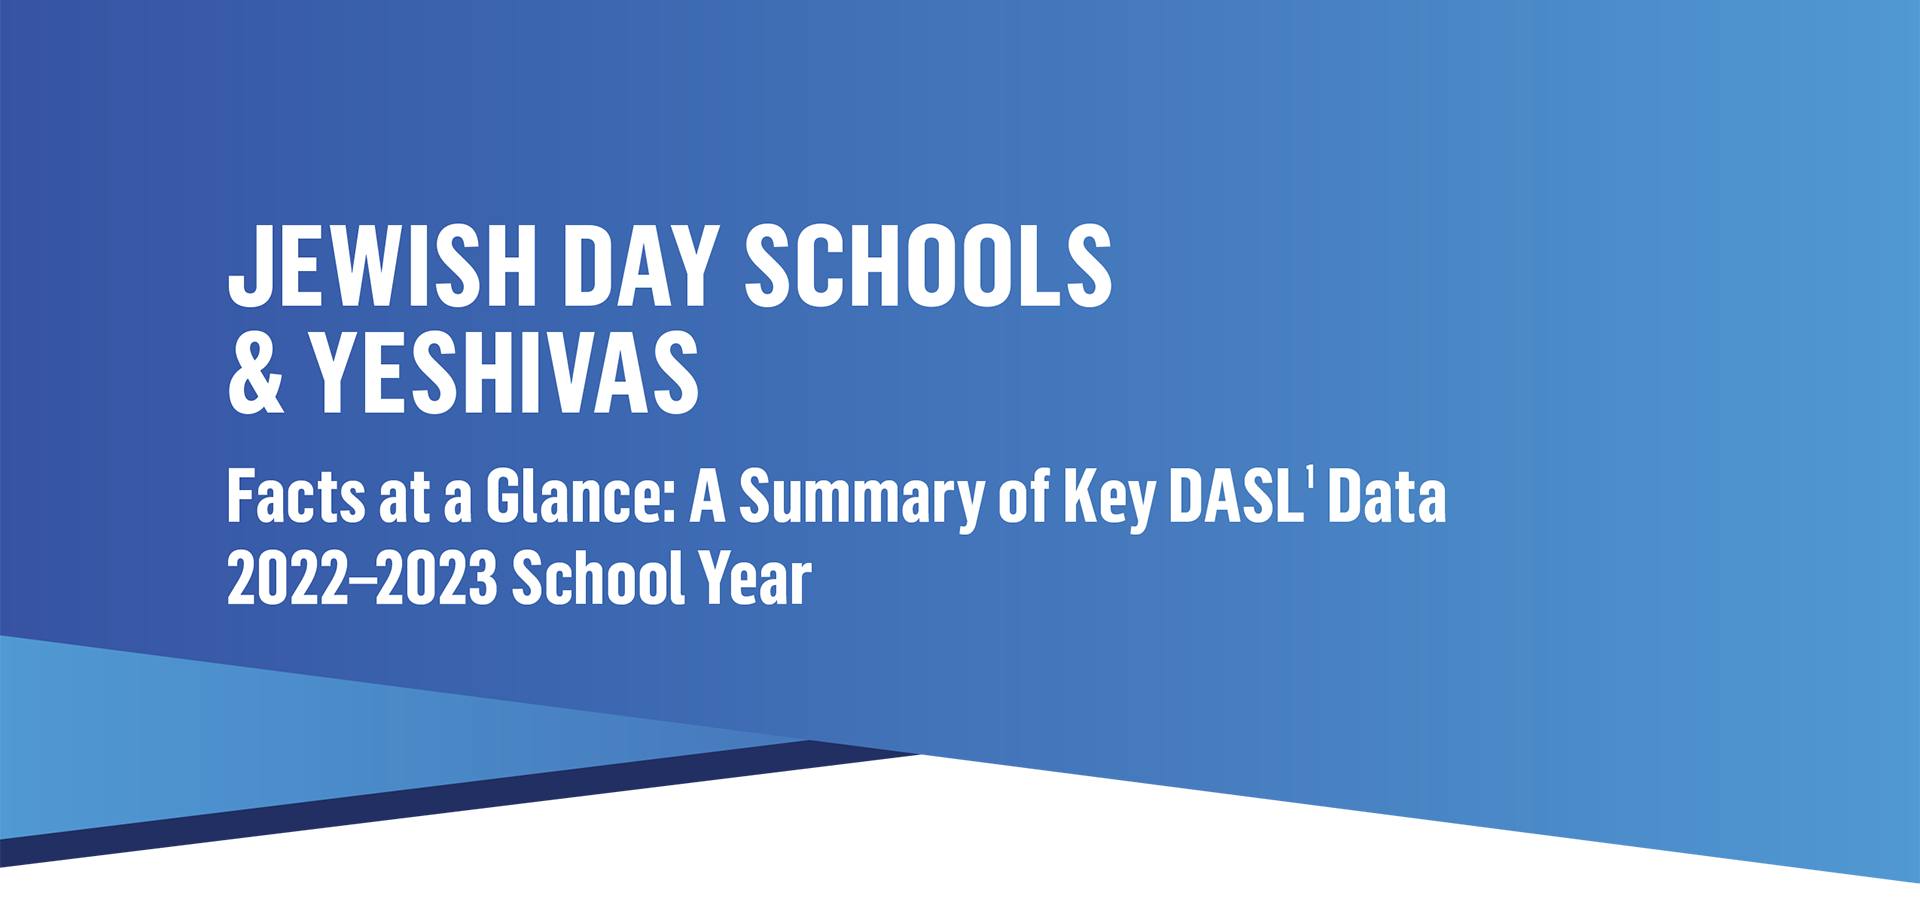 Jewish Day Schools and Yeshivas Facts at a Glance